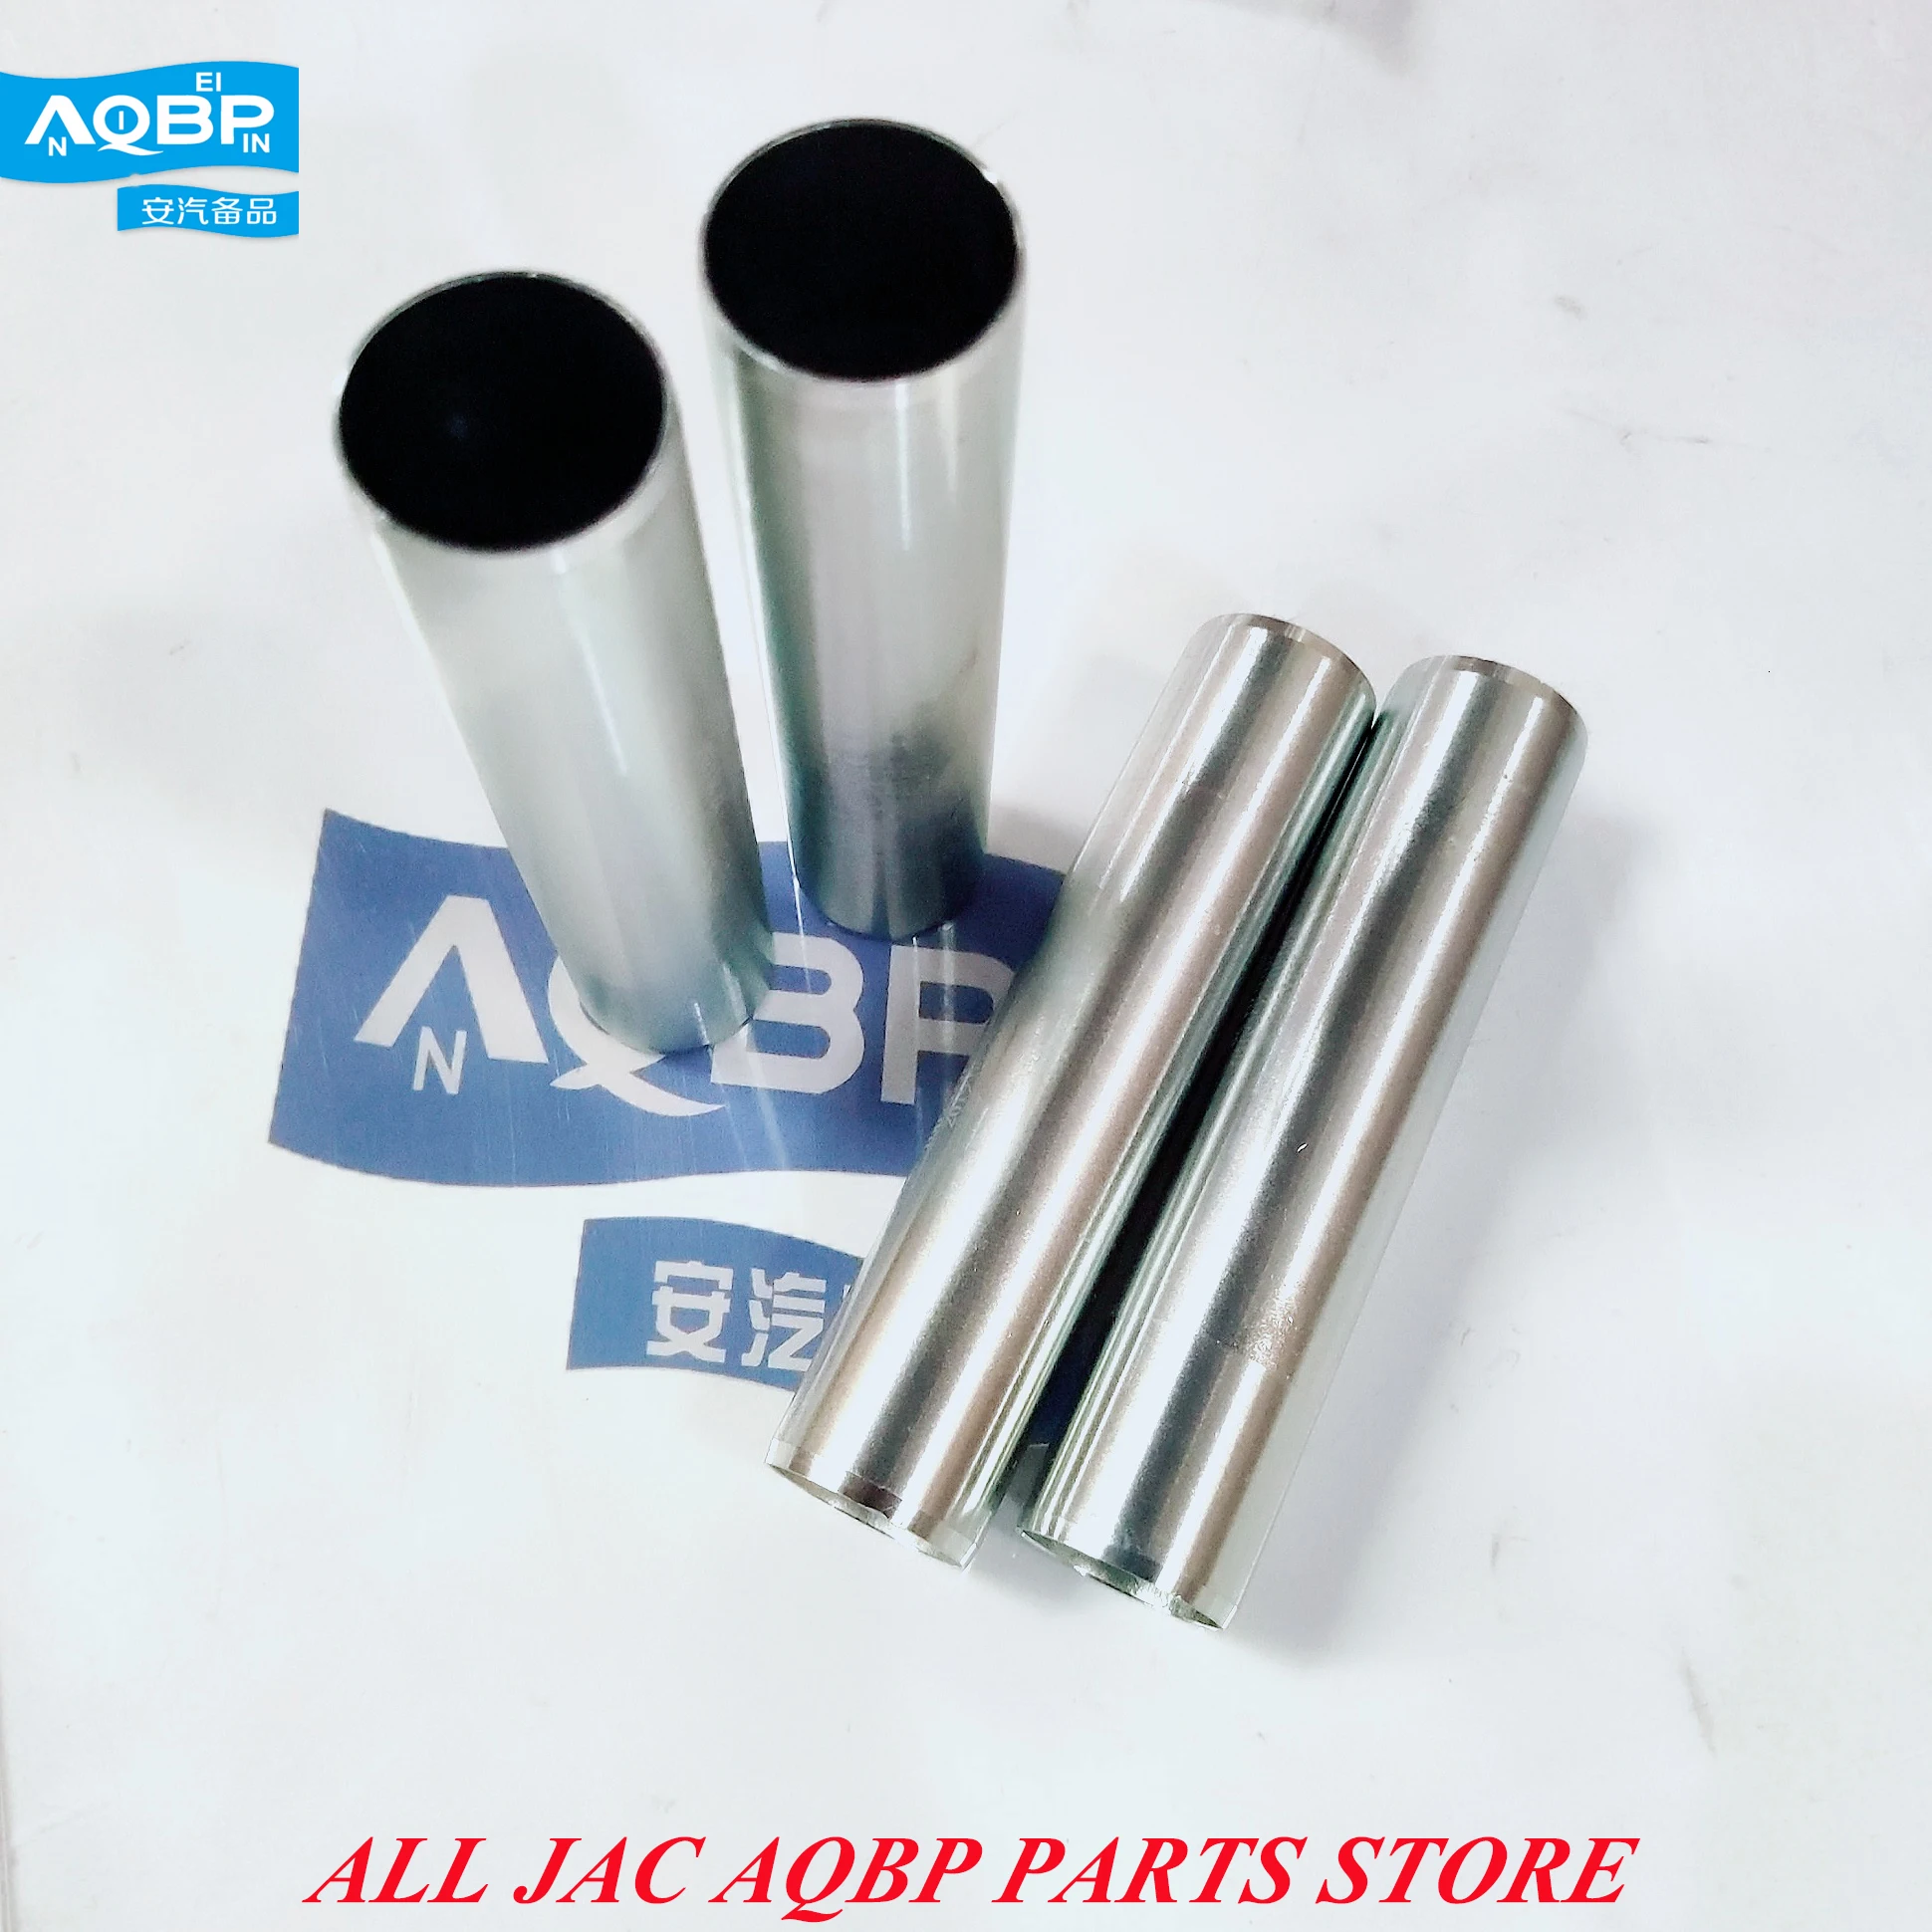 

4 pieces Auto accessorie parts OE Number 1003022GG010 for JAC J4 J5 J6 S3 Spark plug canister piston rings China